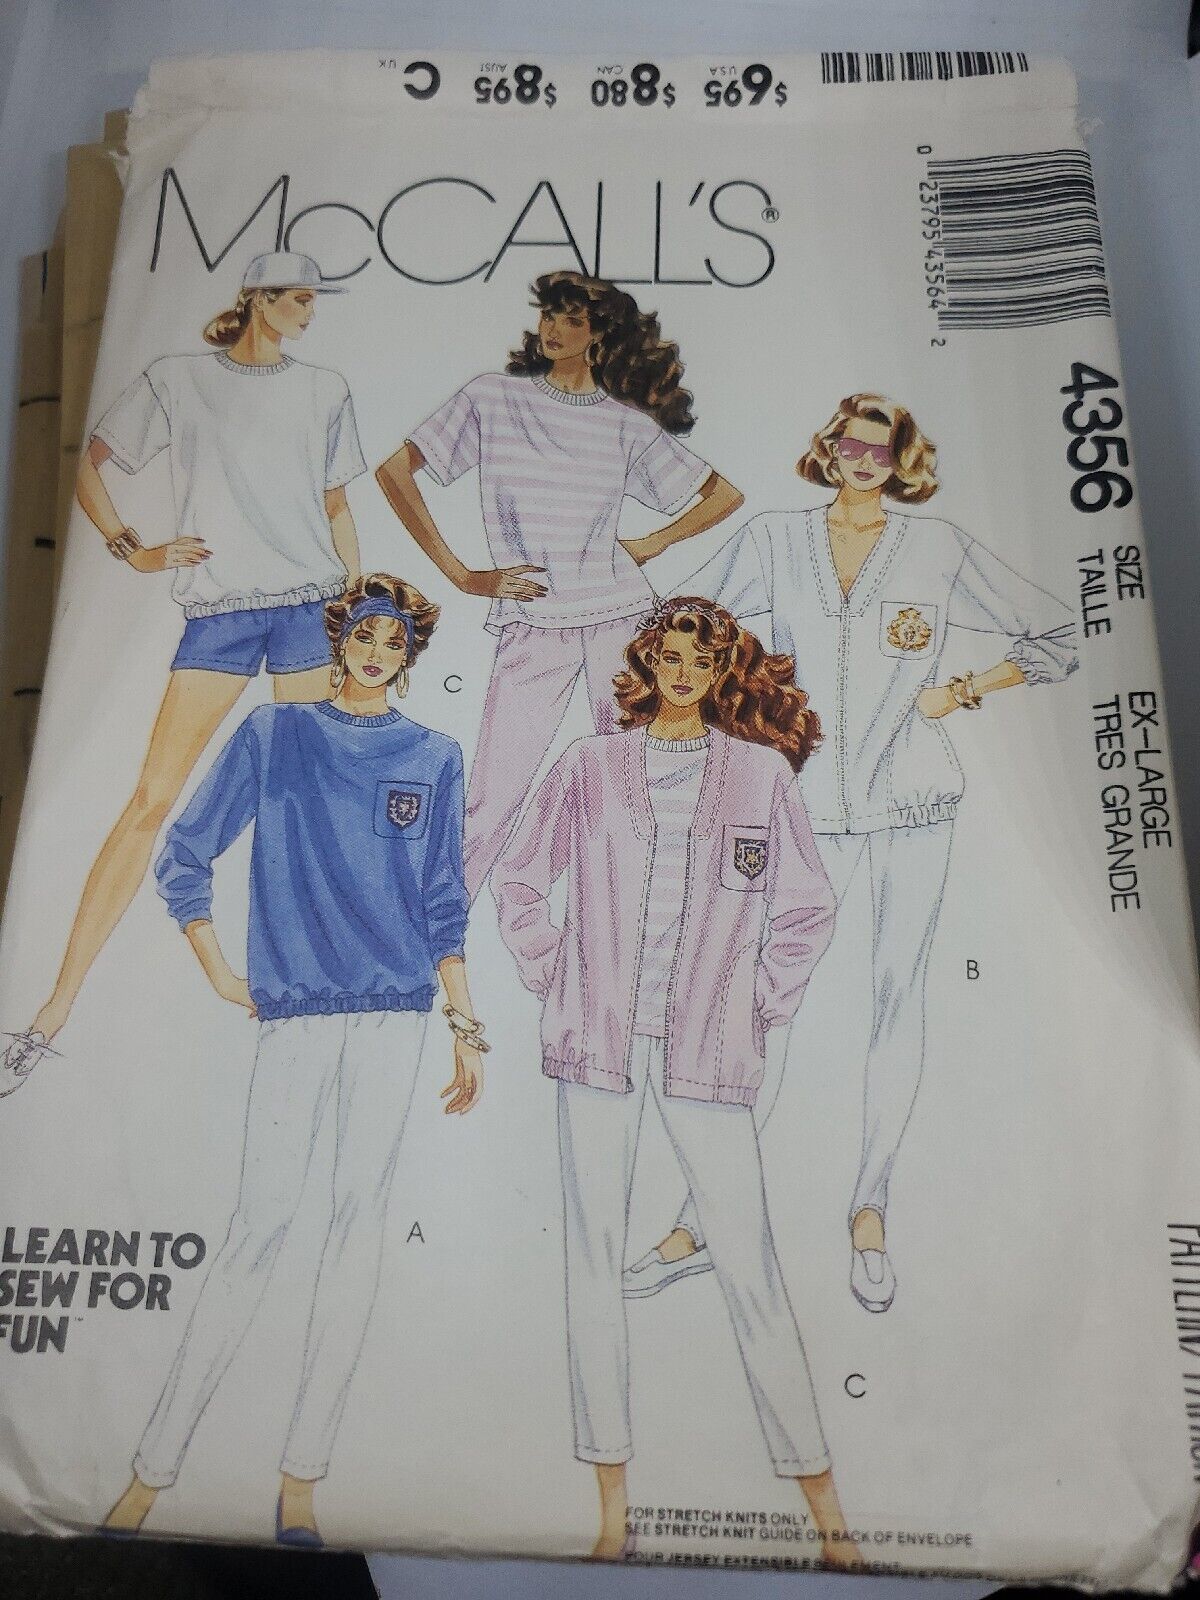 Primary image for McCall's 4356, Size Large (18-20)